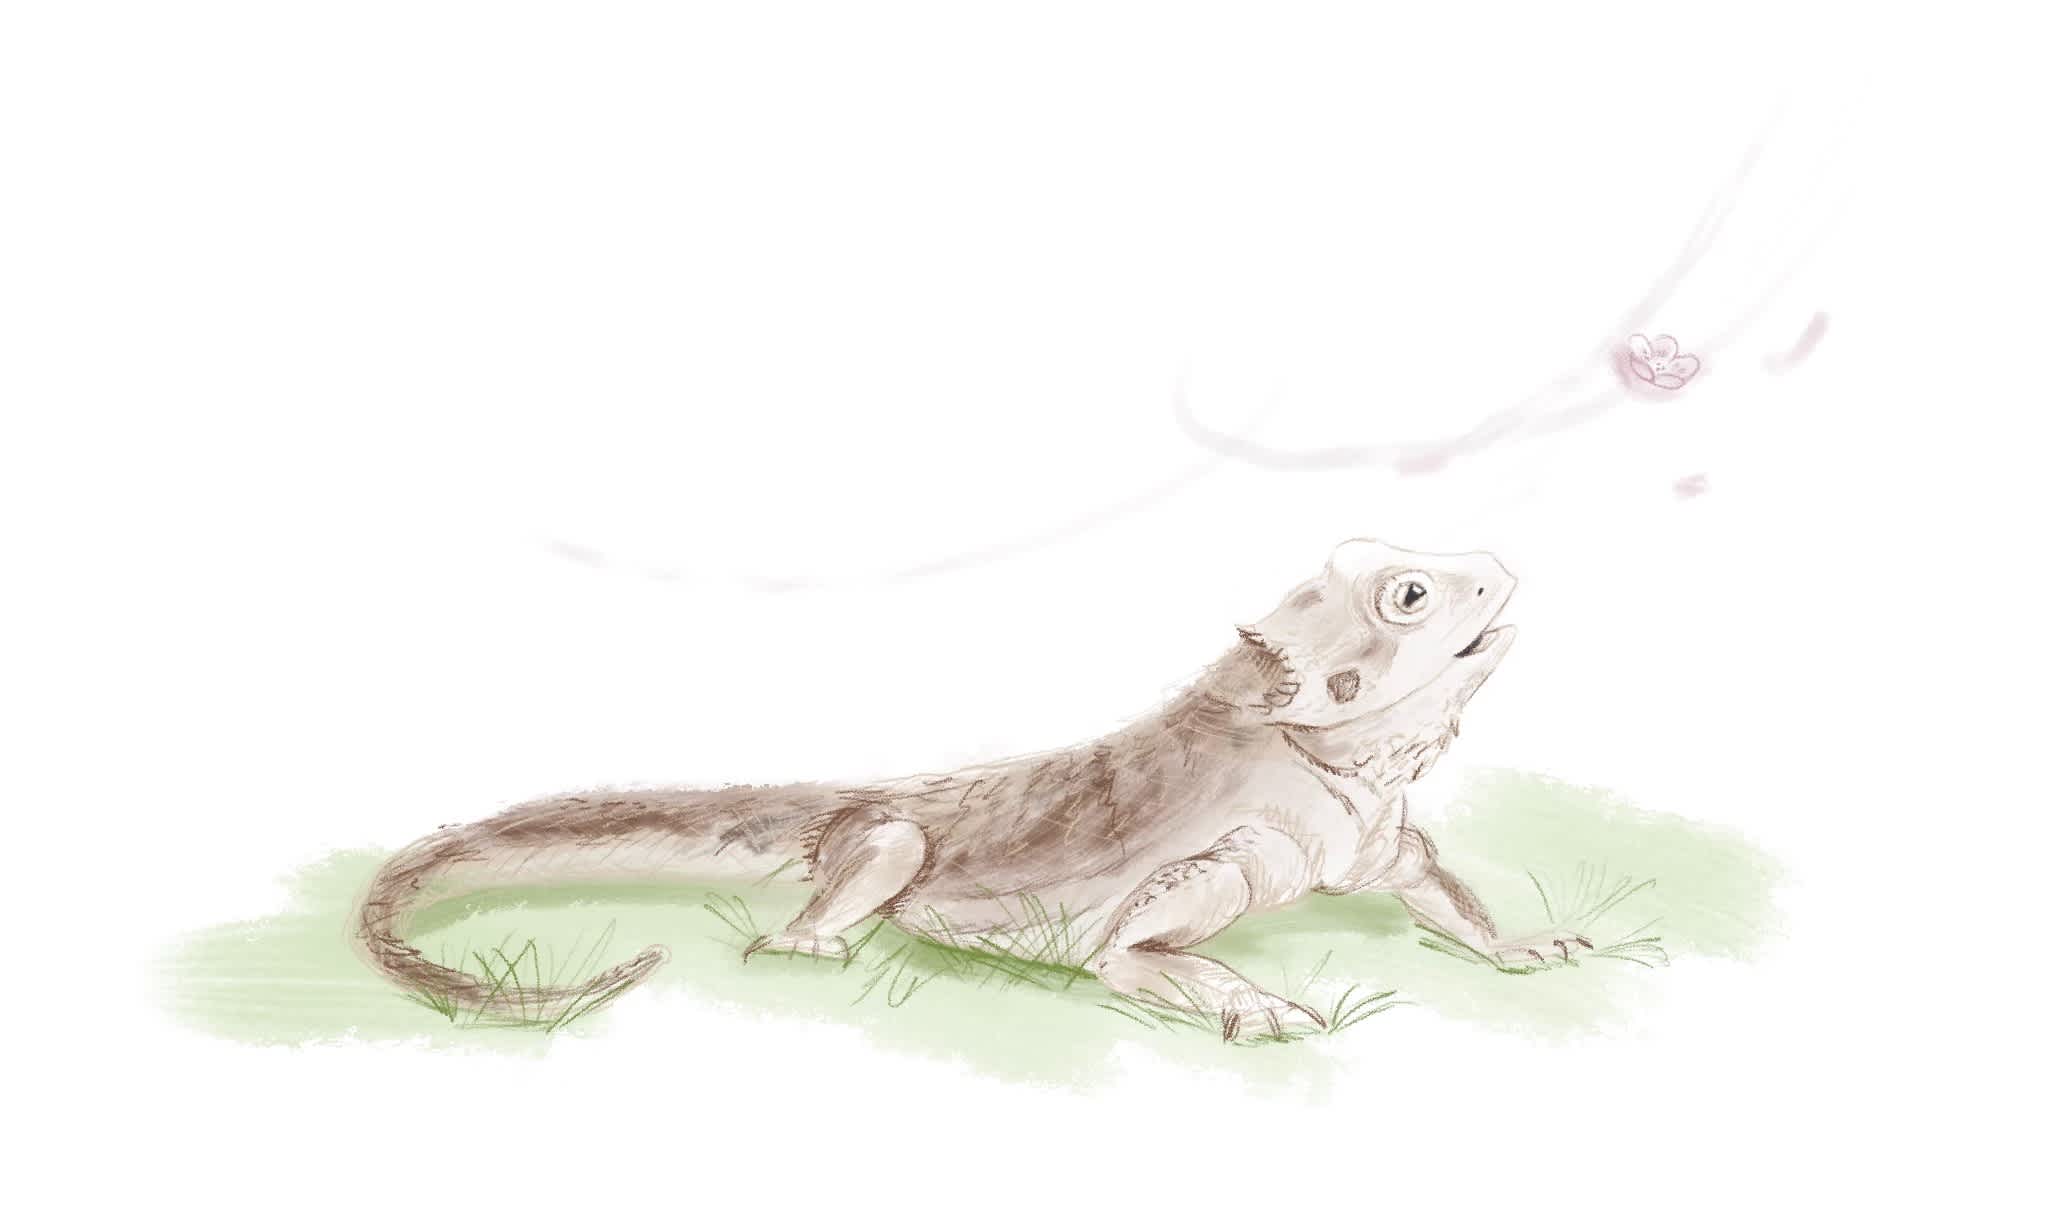 Bearded dragon happily watching cherry blossom floating